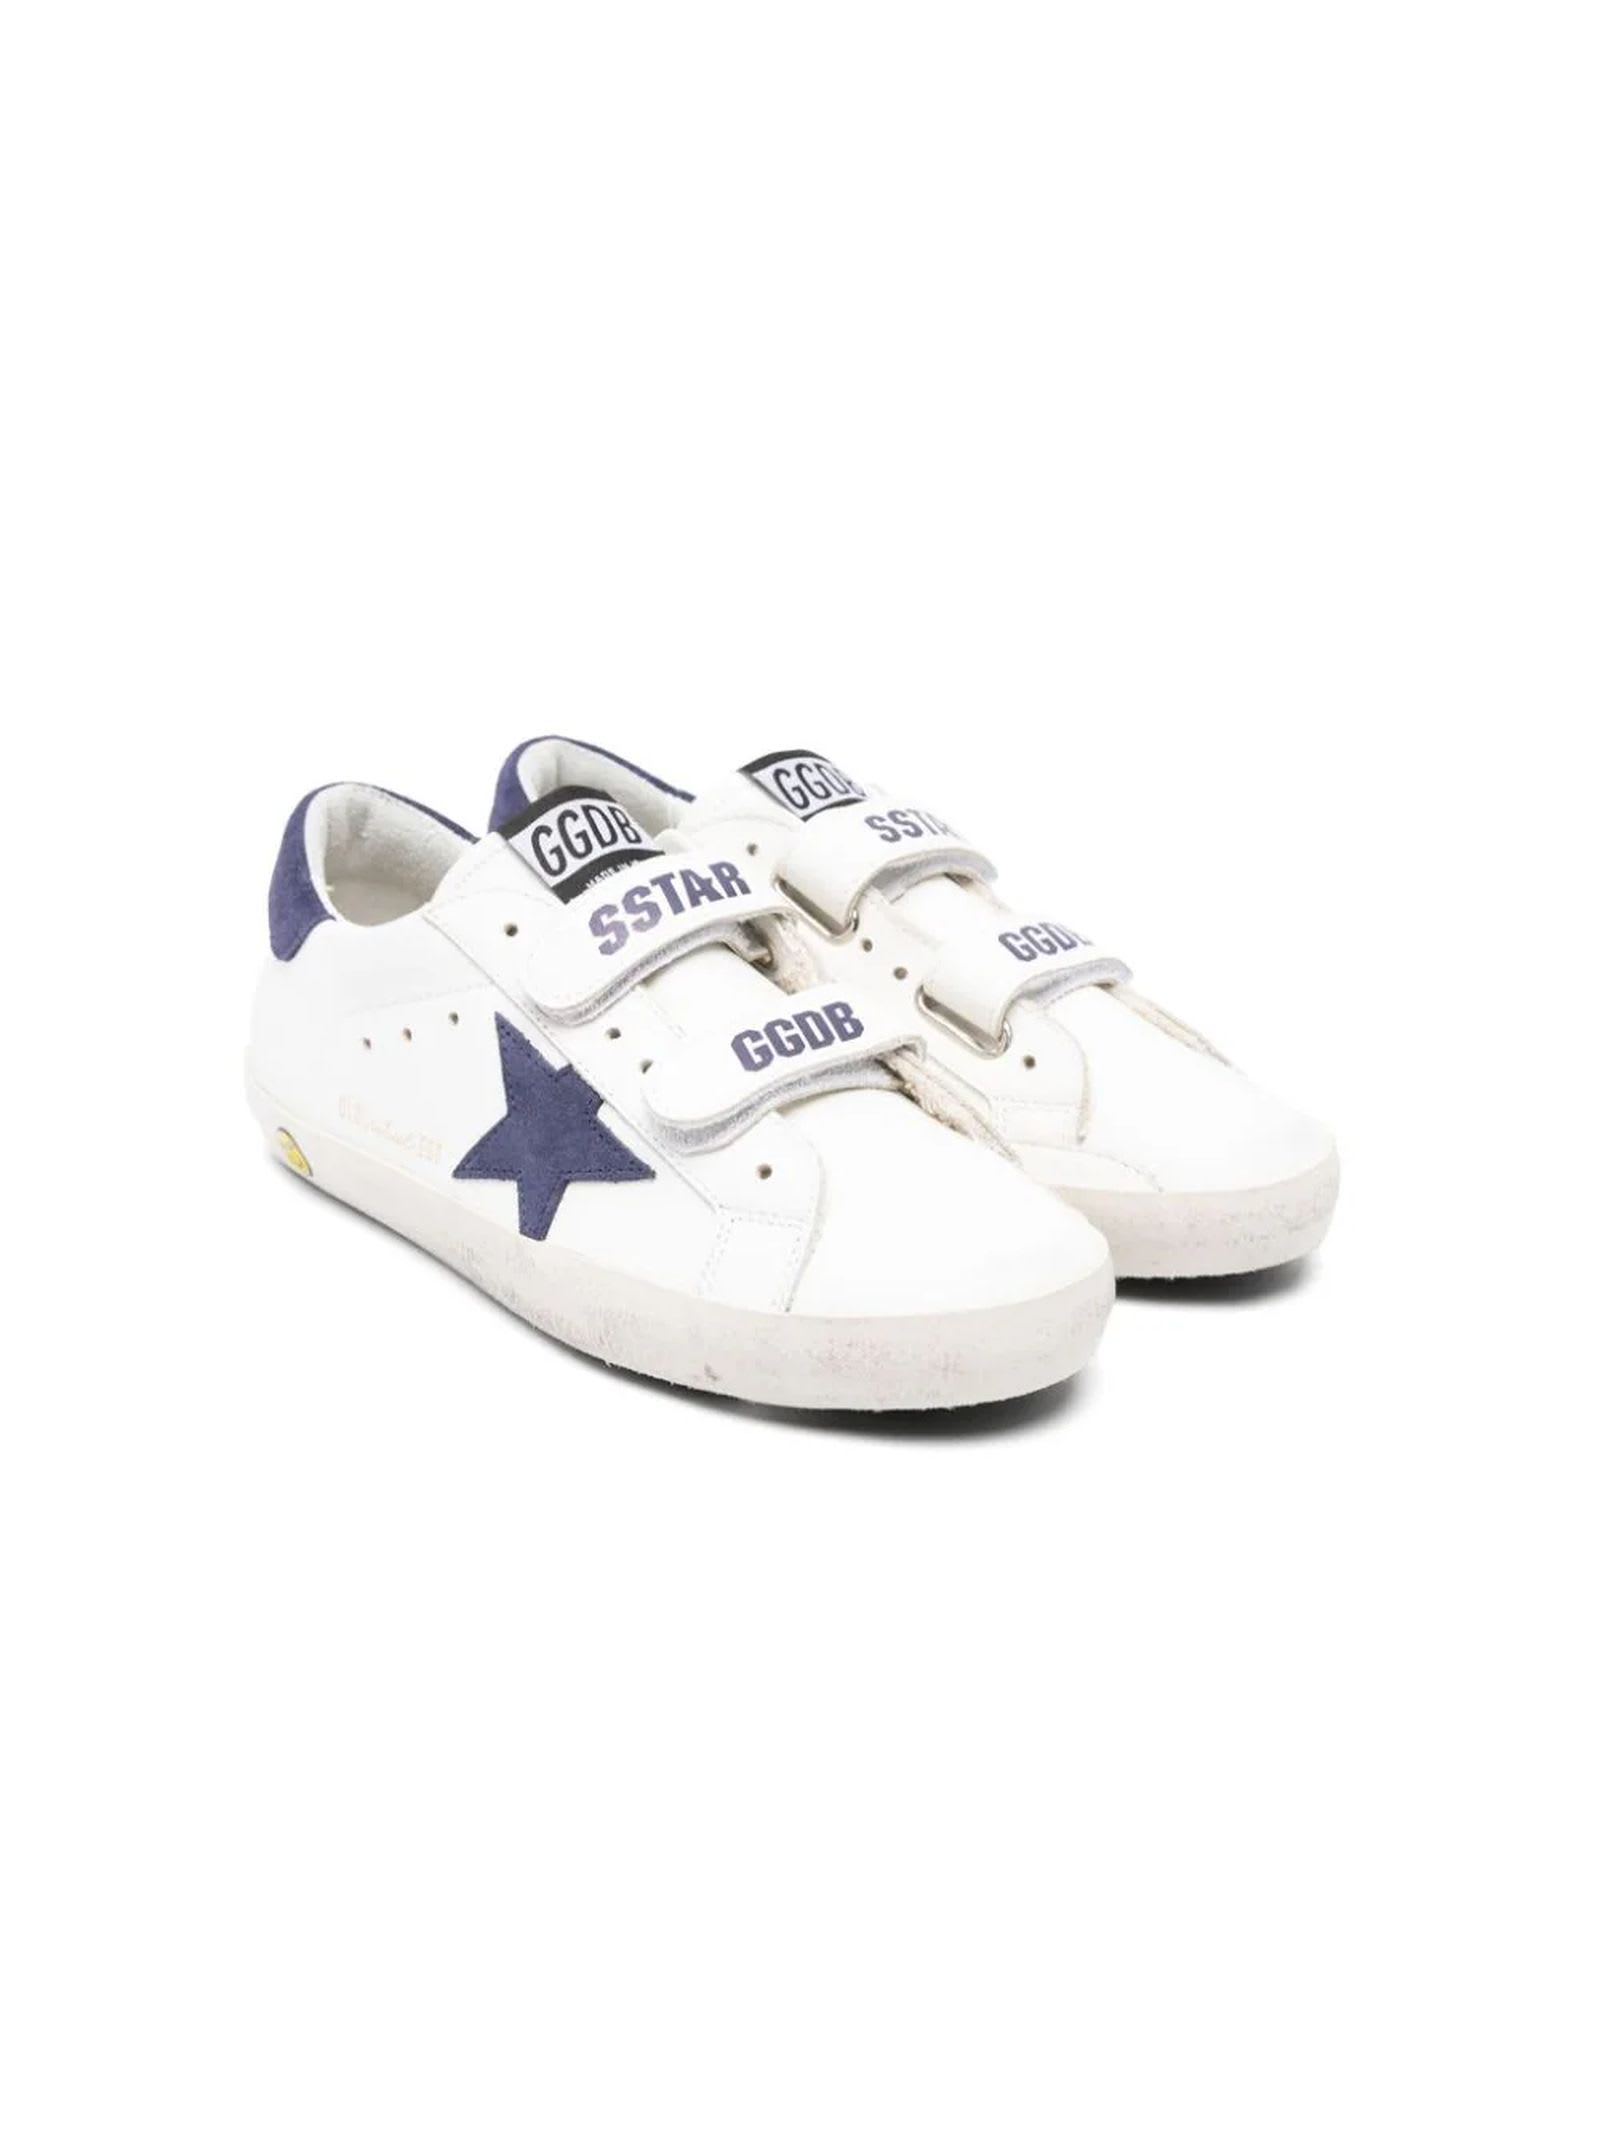 Shop Golden Goose White Leather Sneakers In White/blue Depths